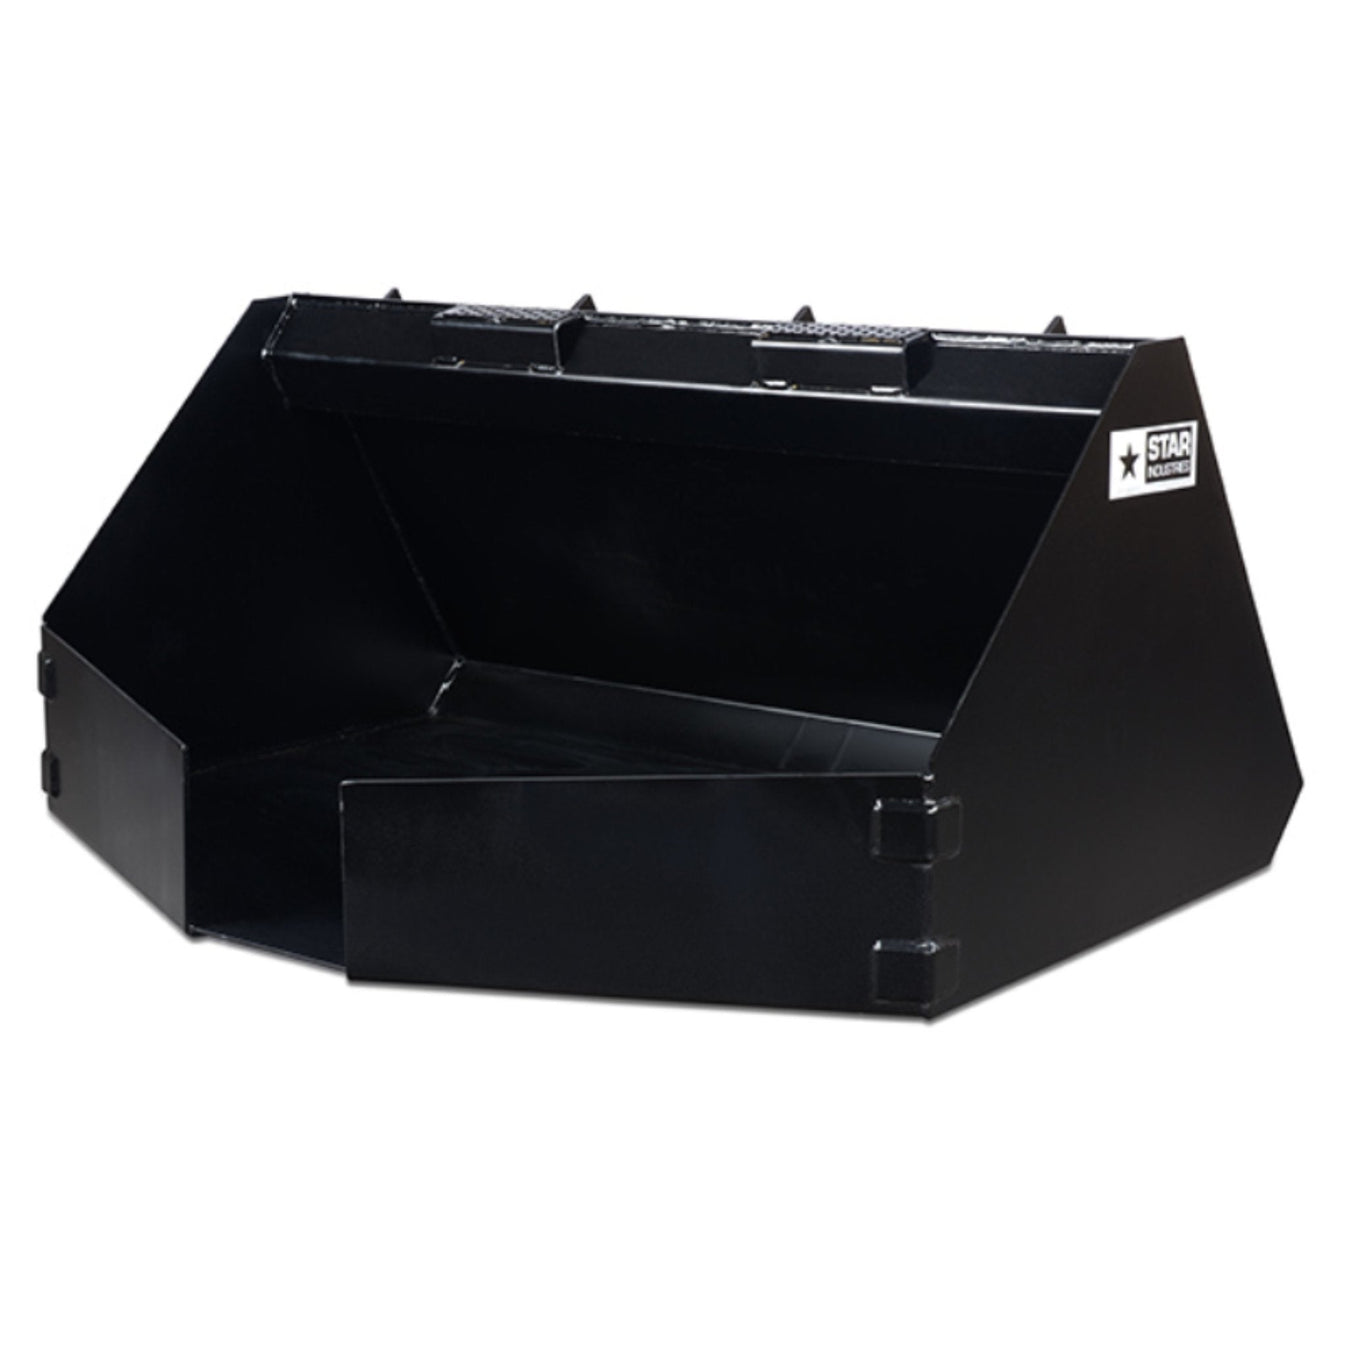 Skid Steer Concrete Buckets - Attachments King